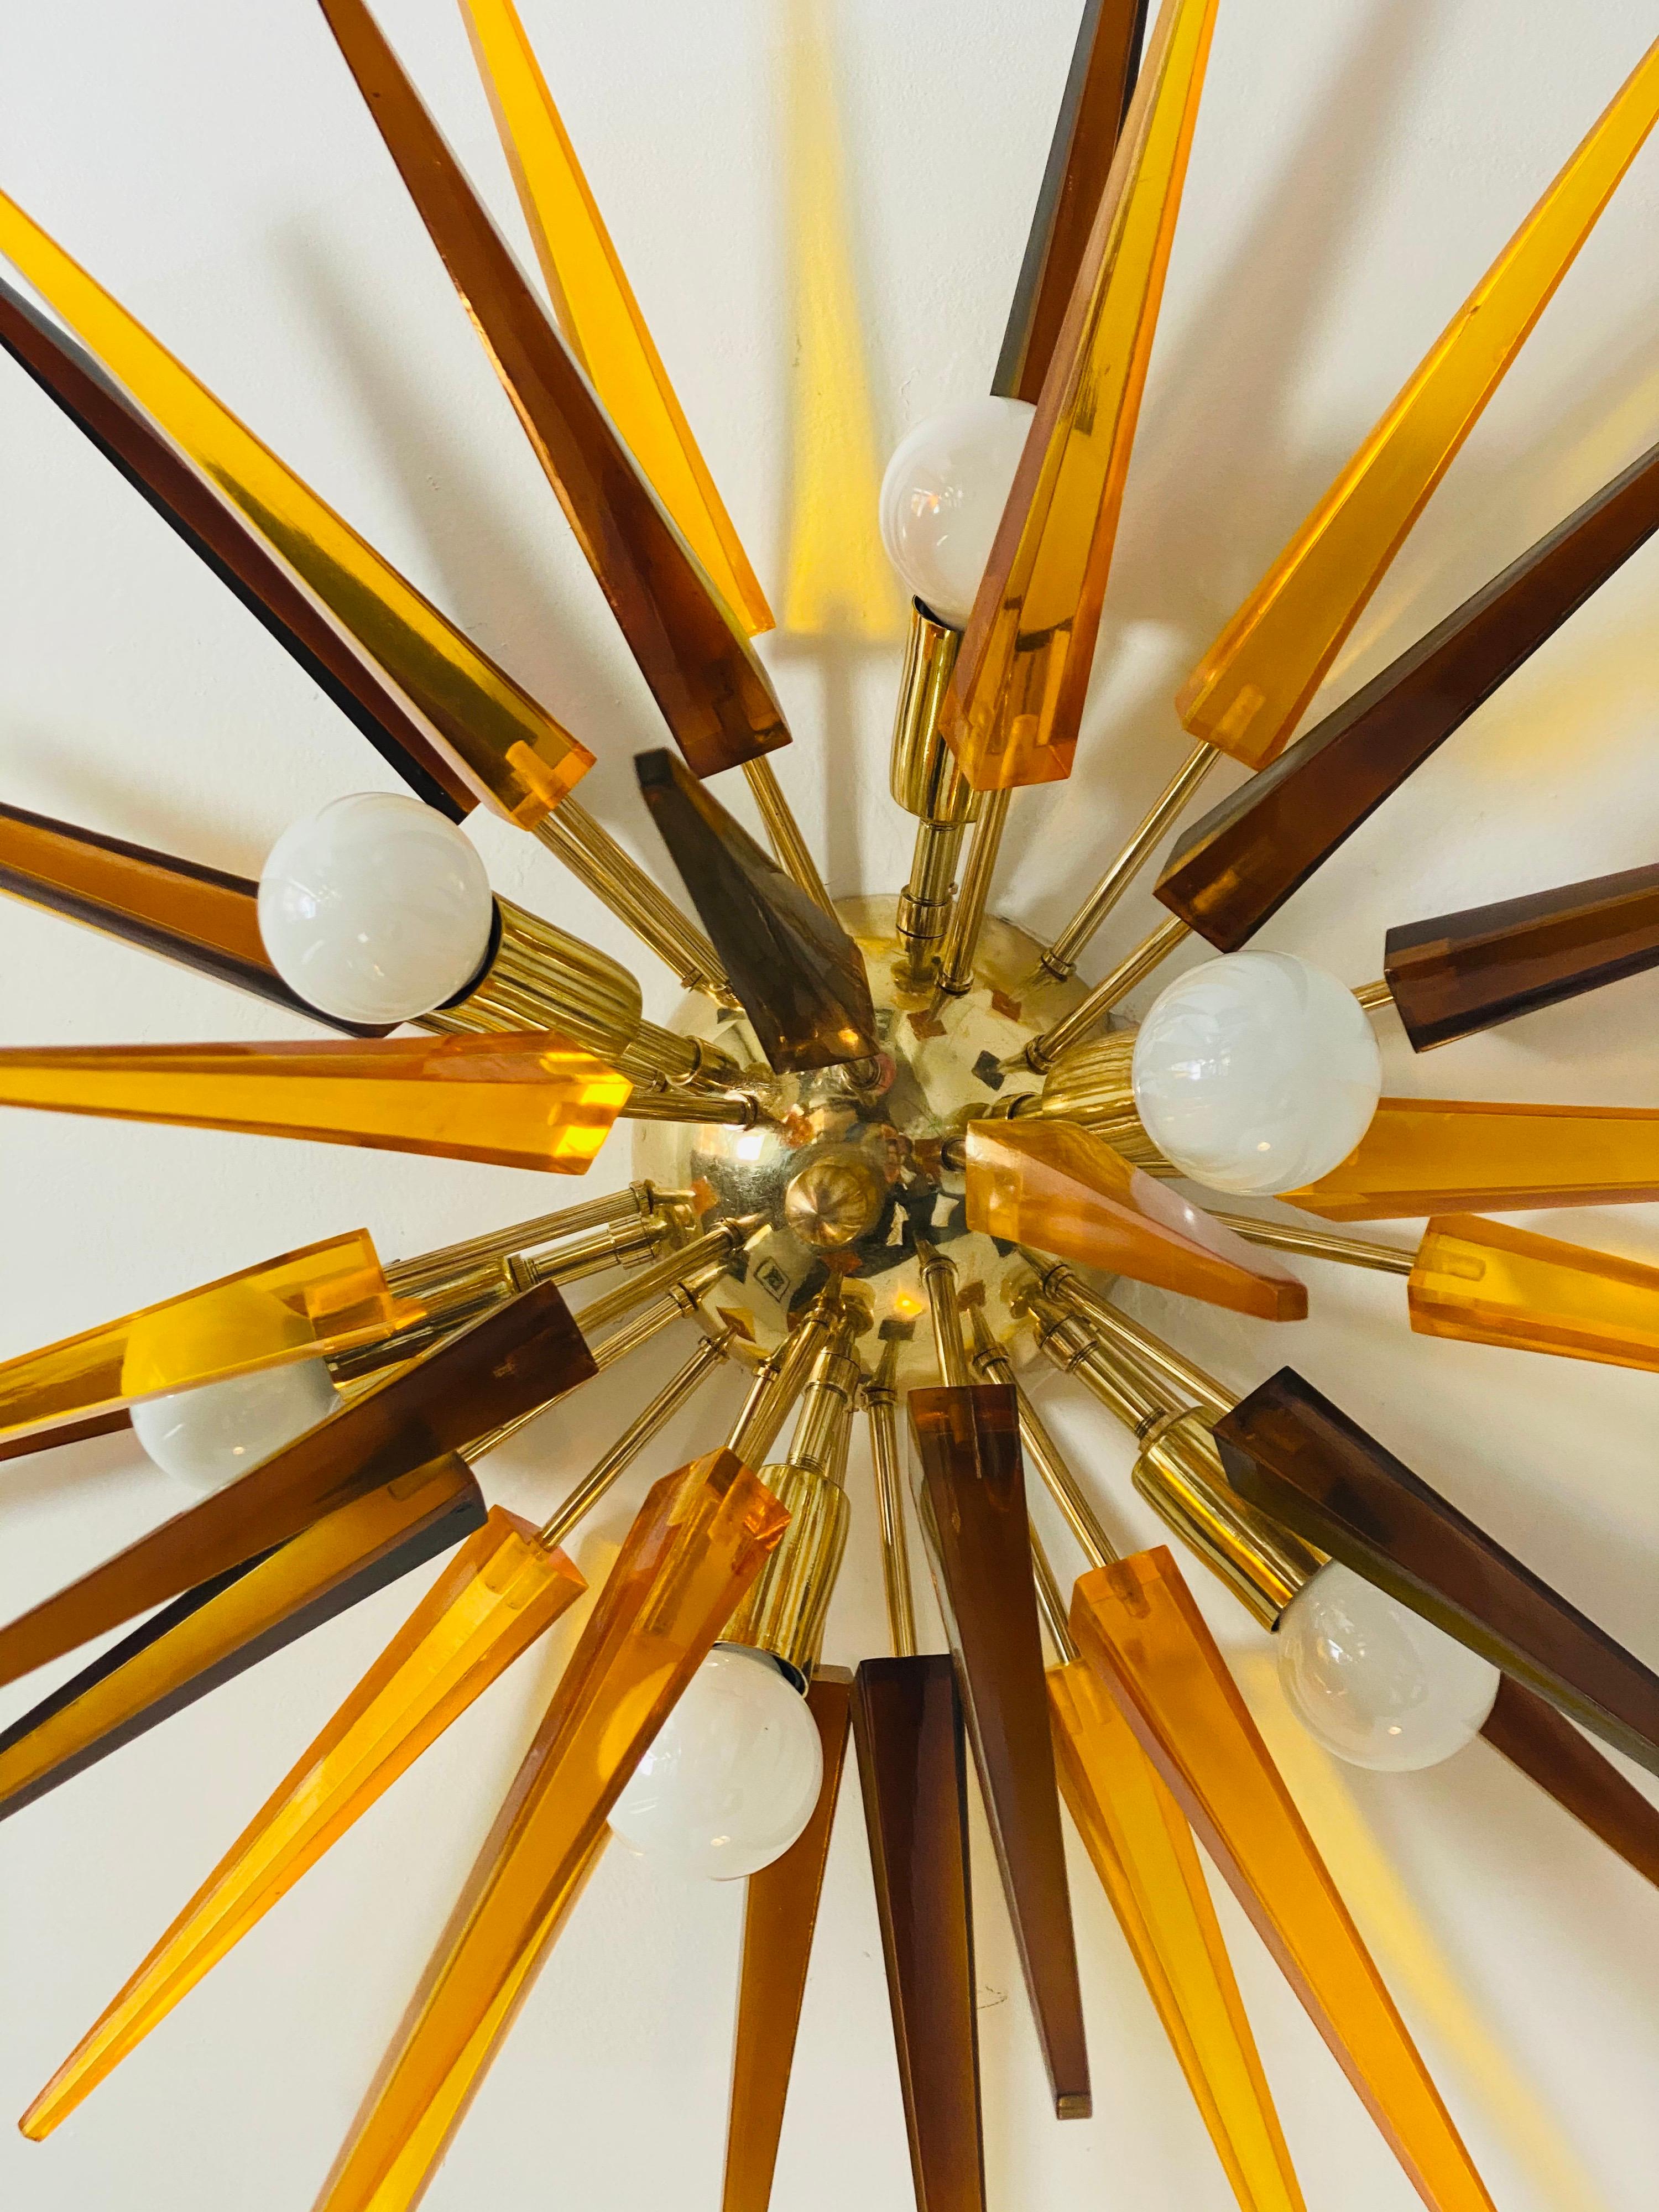 French 1990s Sunburst Flush Light In Excellent Condition For Sale In New York, NY